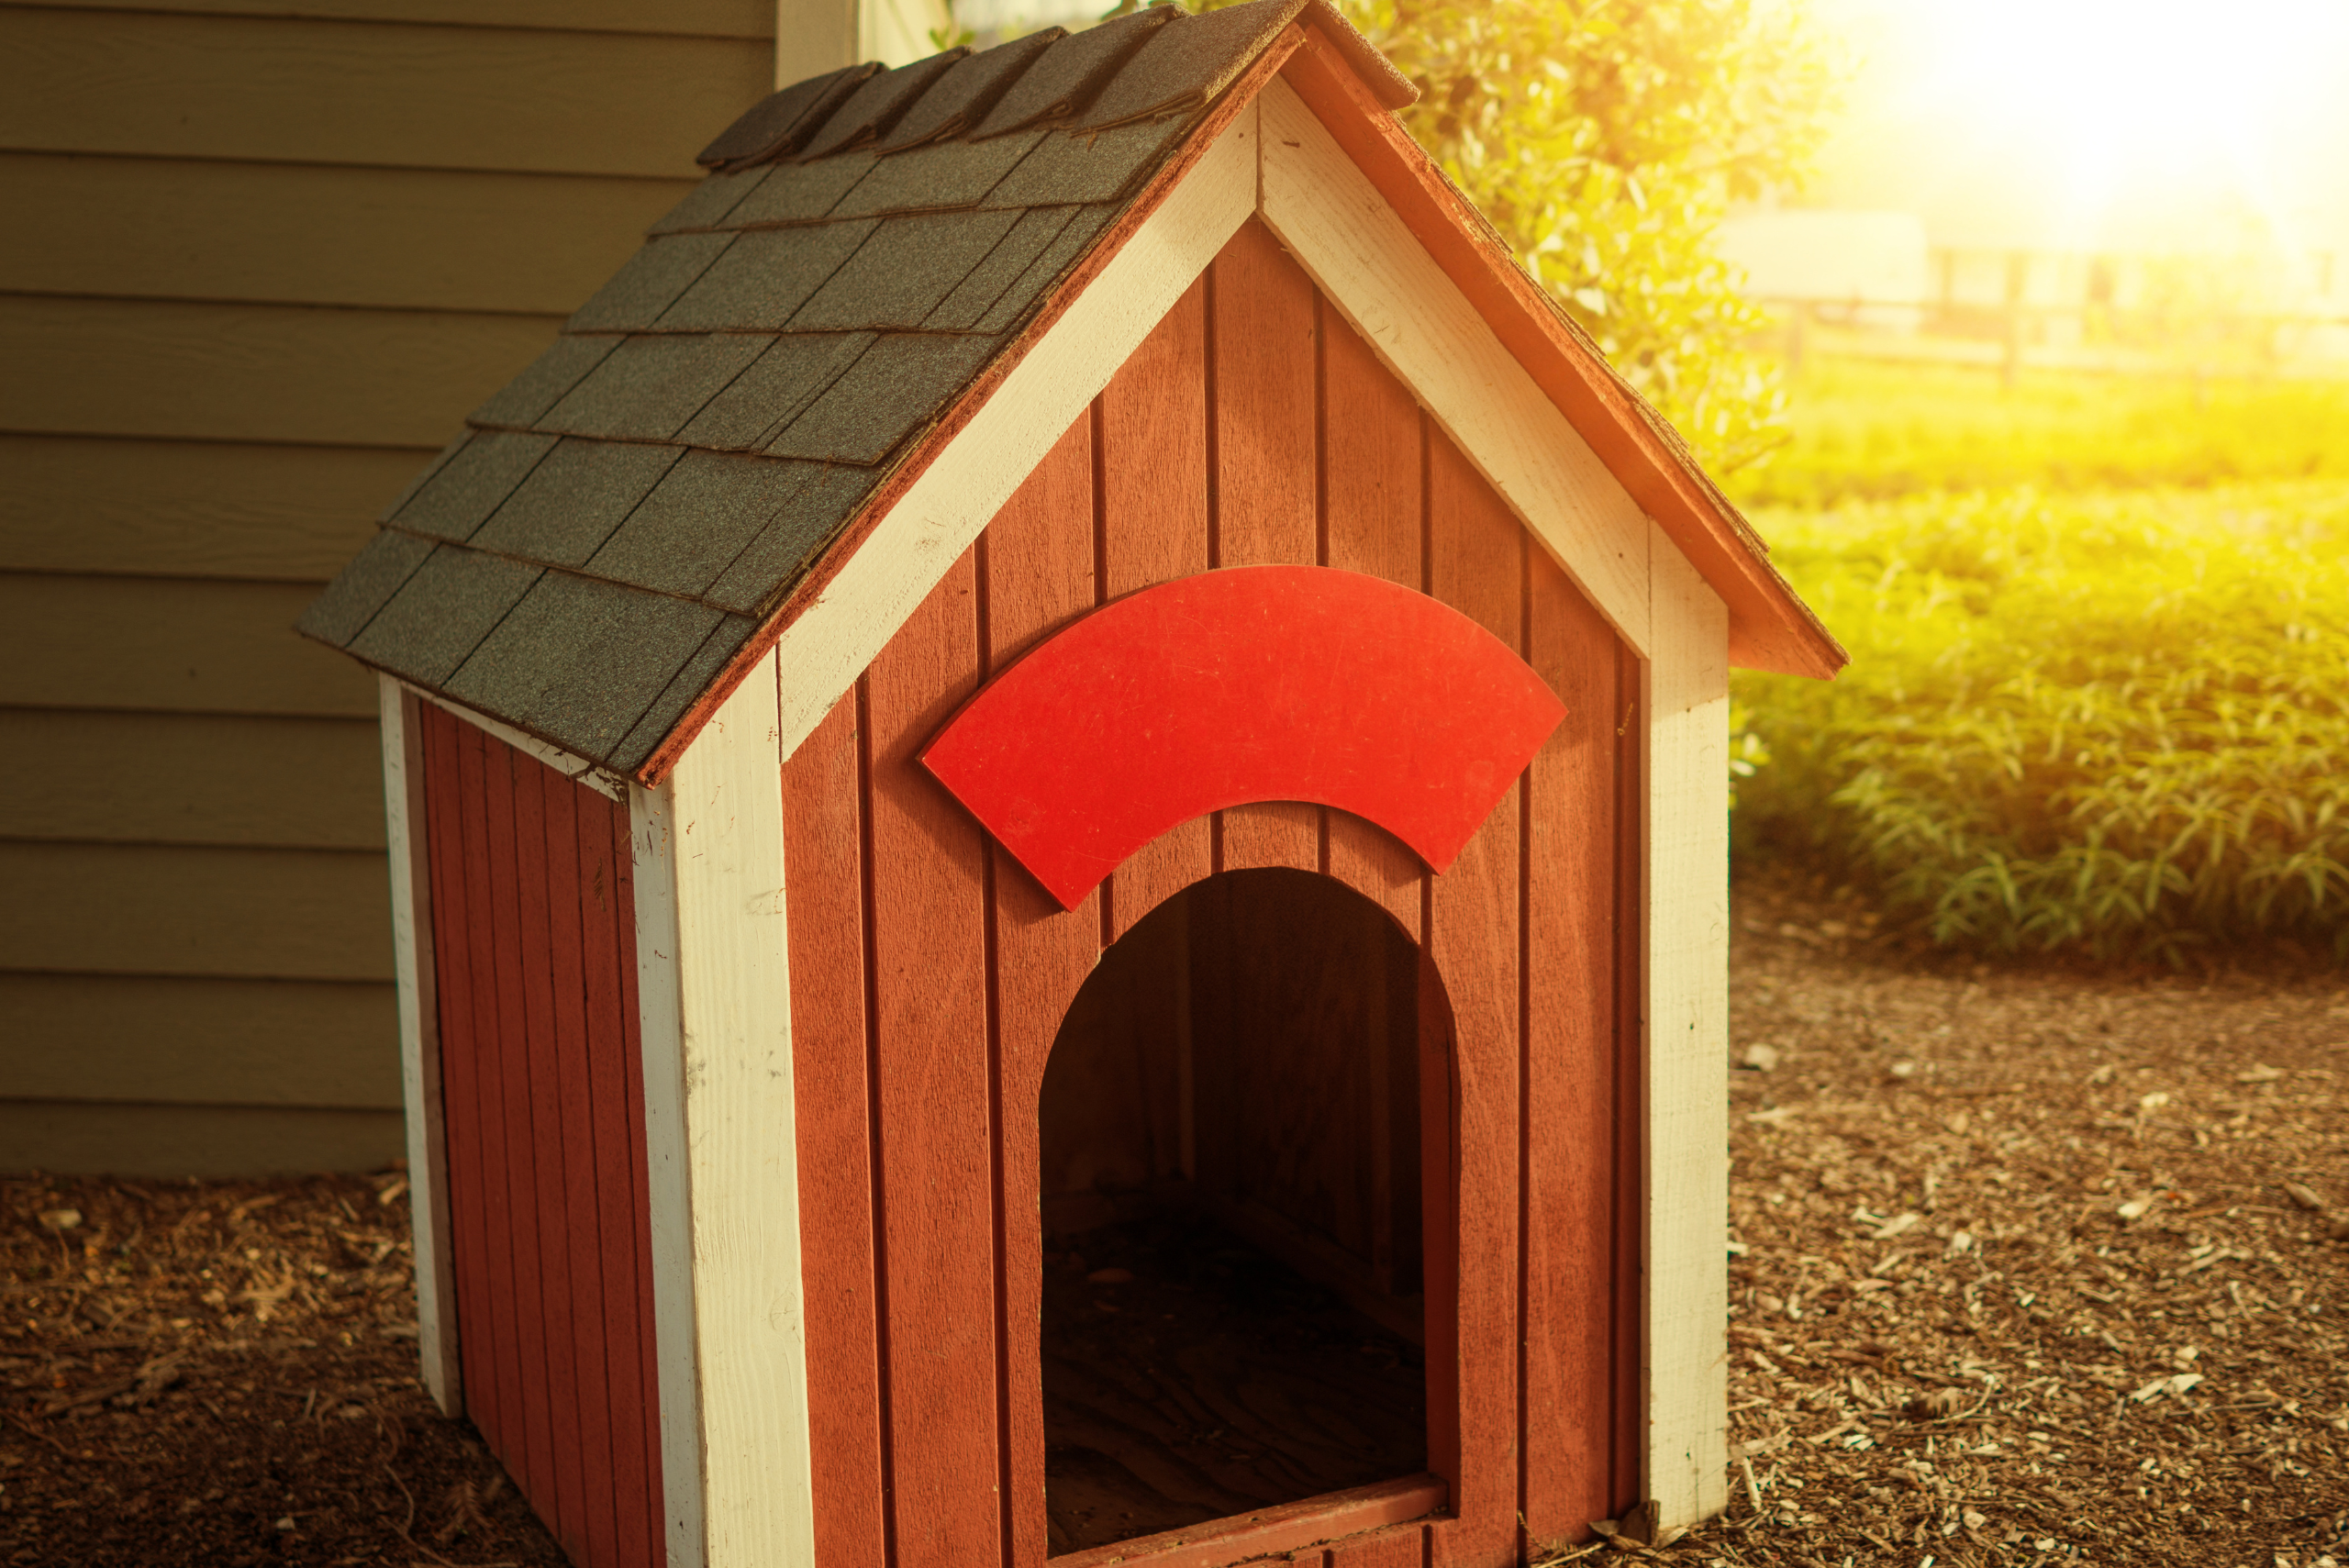 Red dog house with white accents and a roof with shingles.